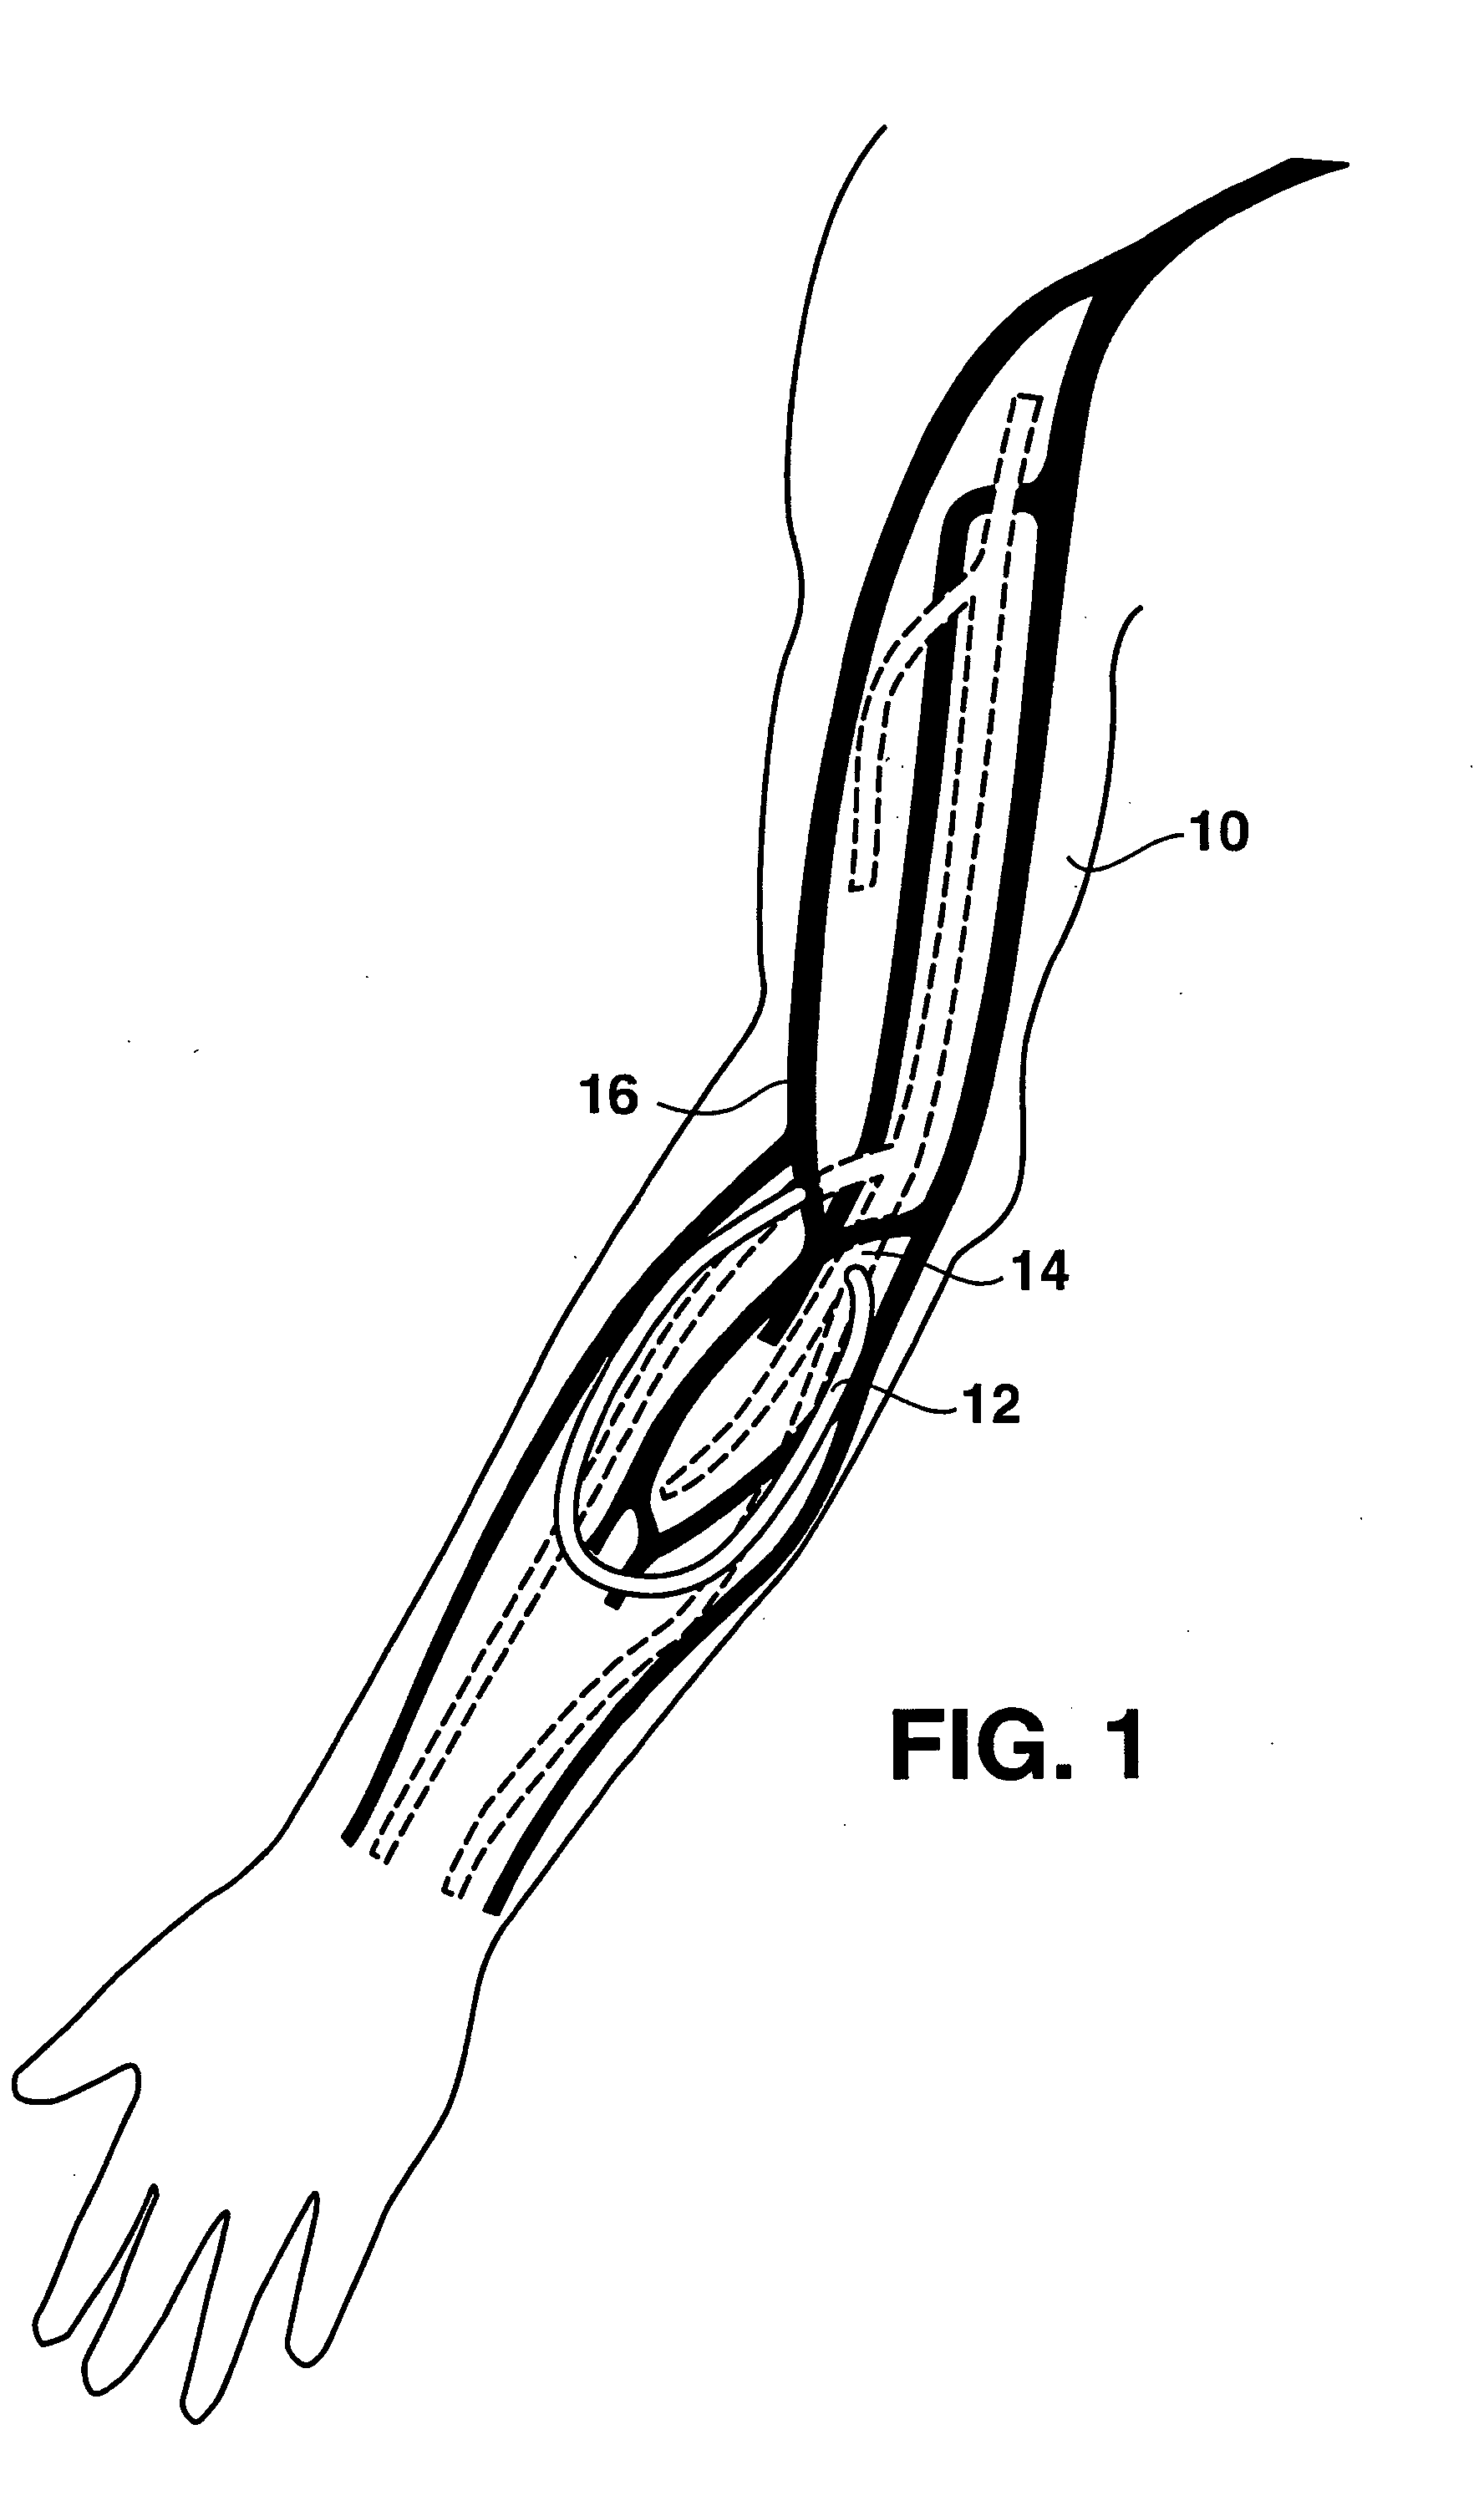 Arteriovenous access valve system and process